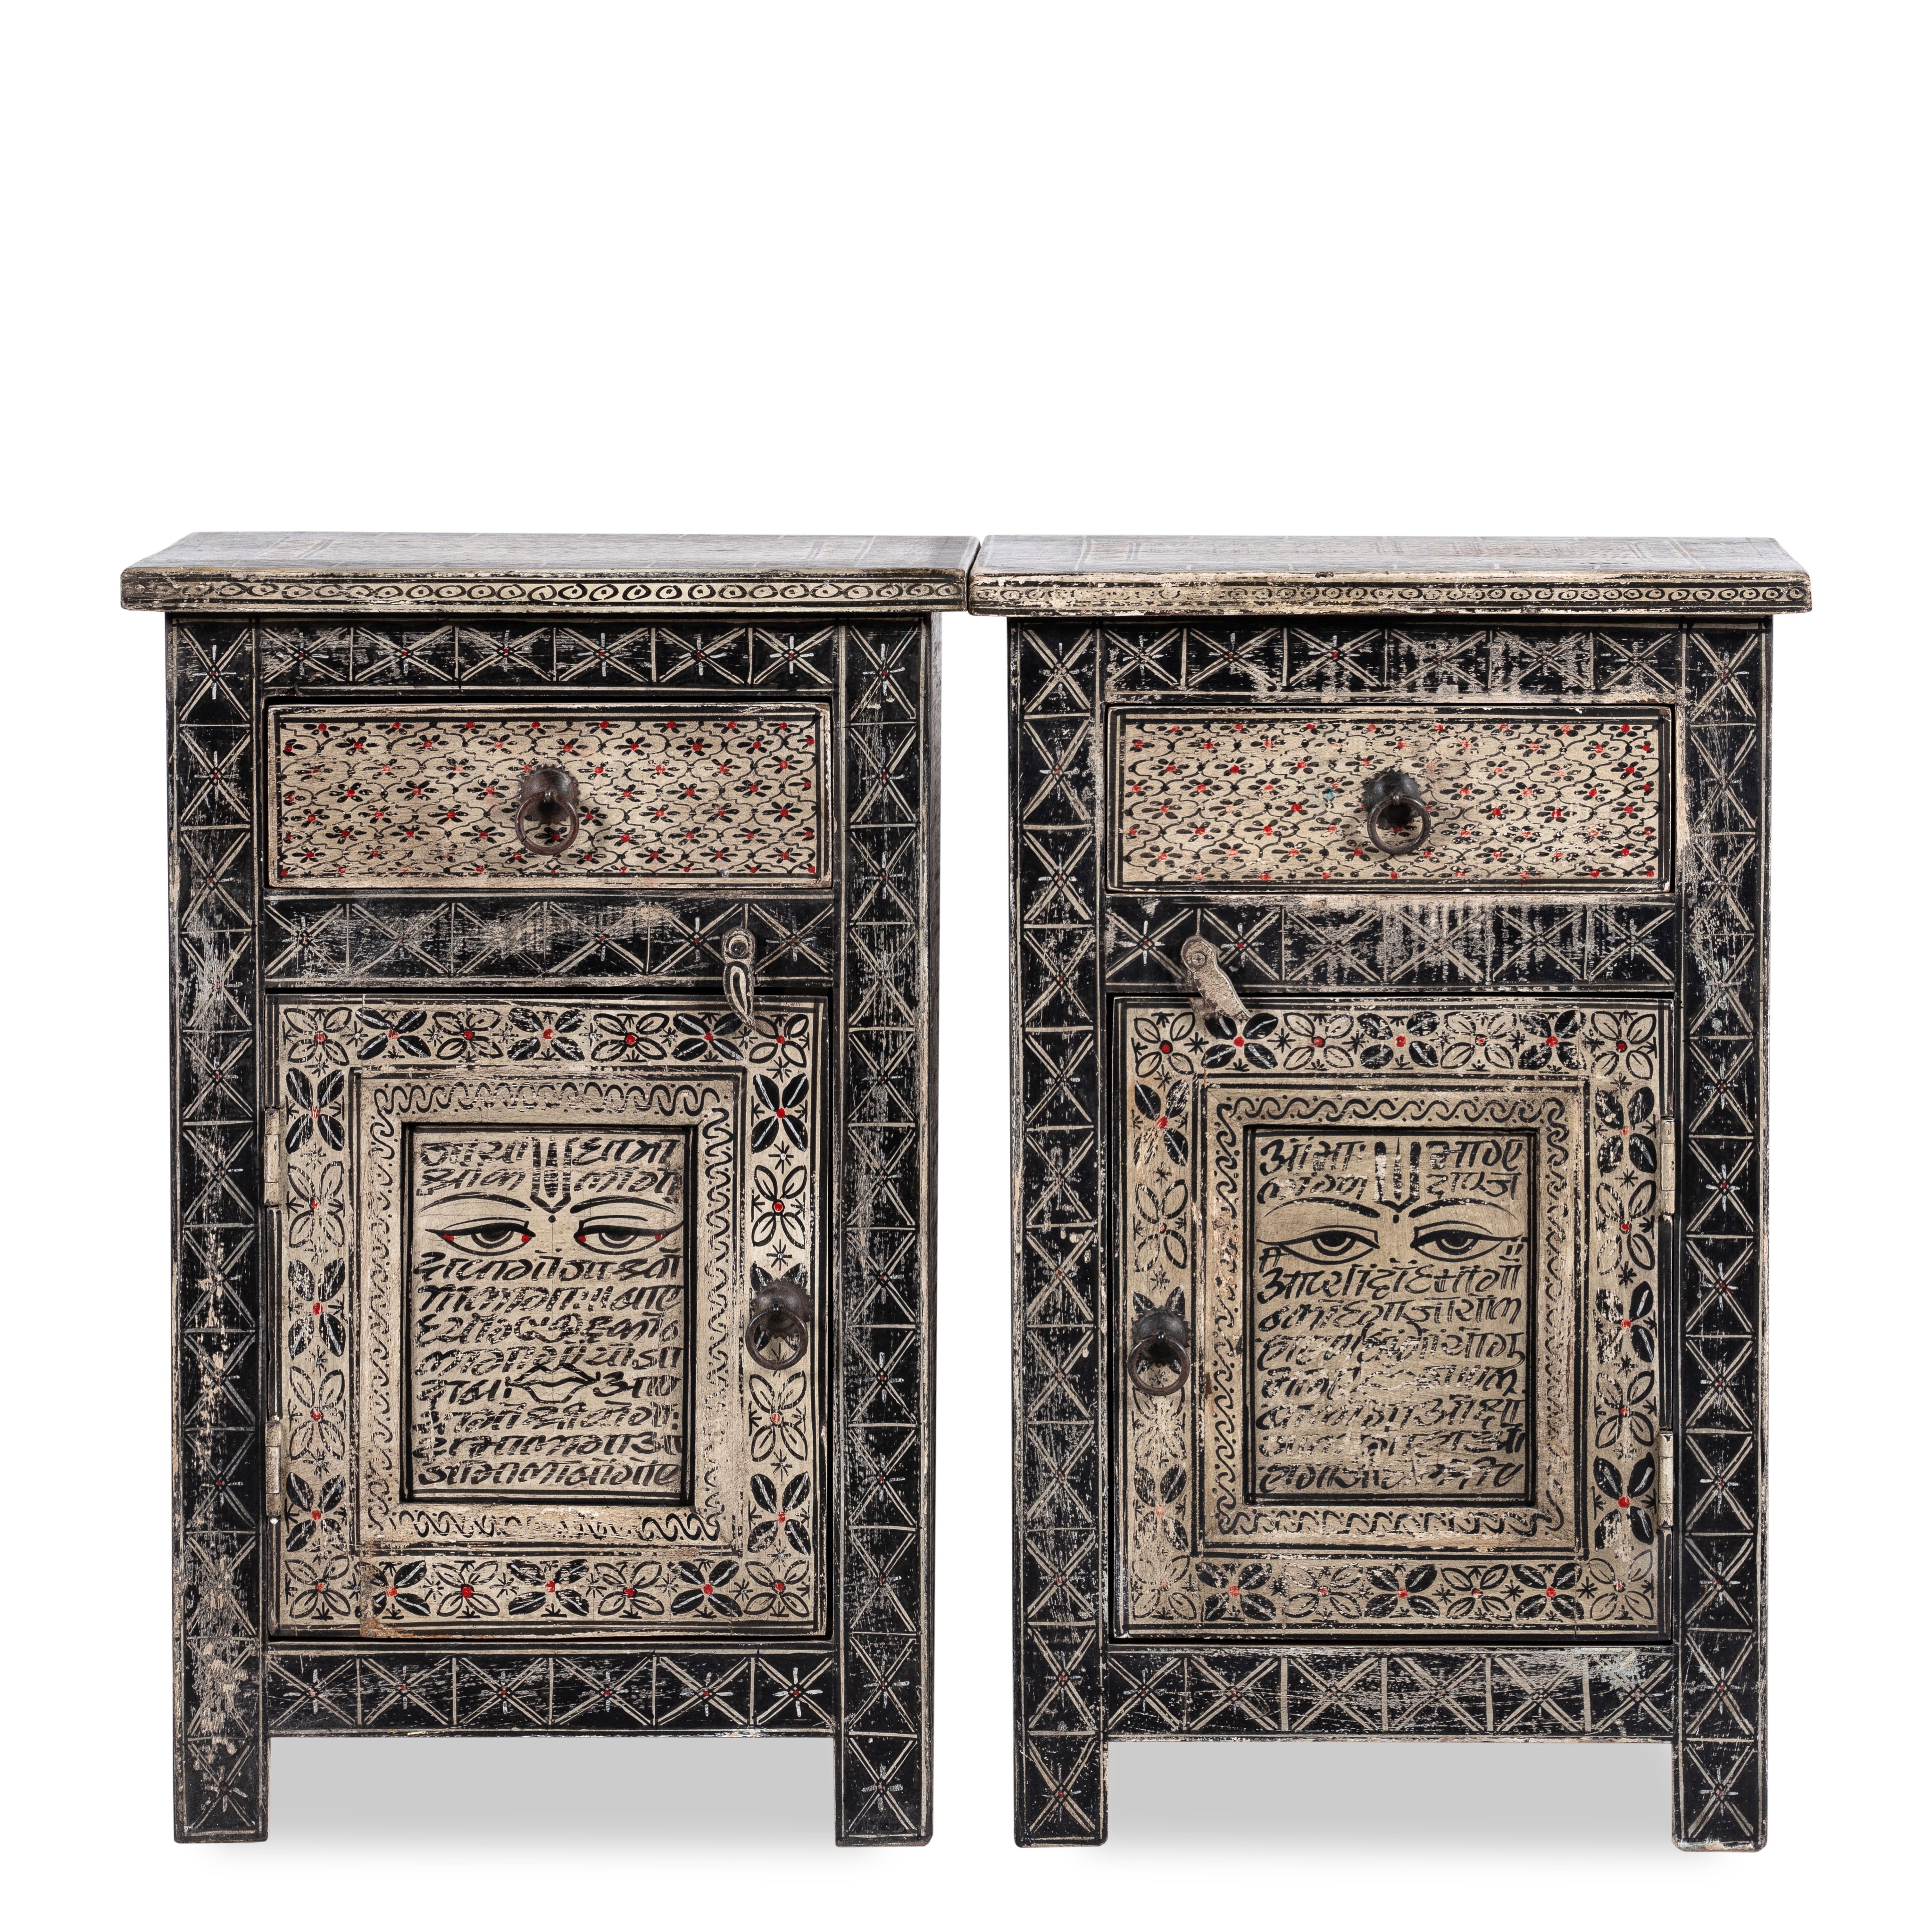 Sanskrit bedside tables with in indian style